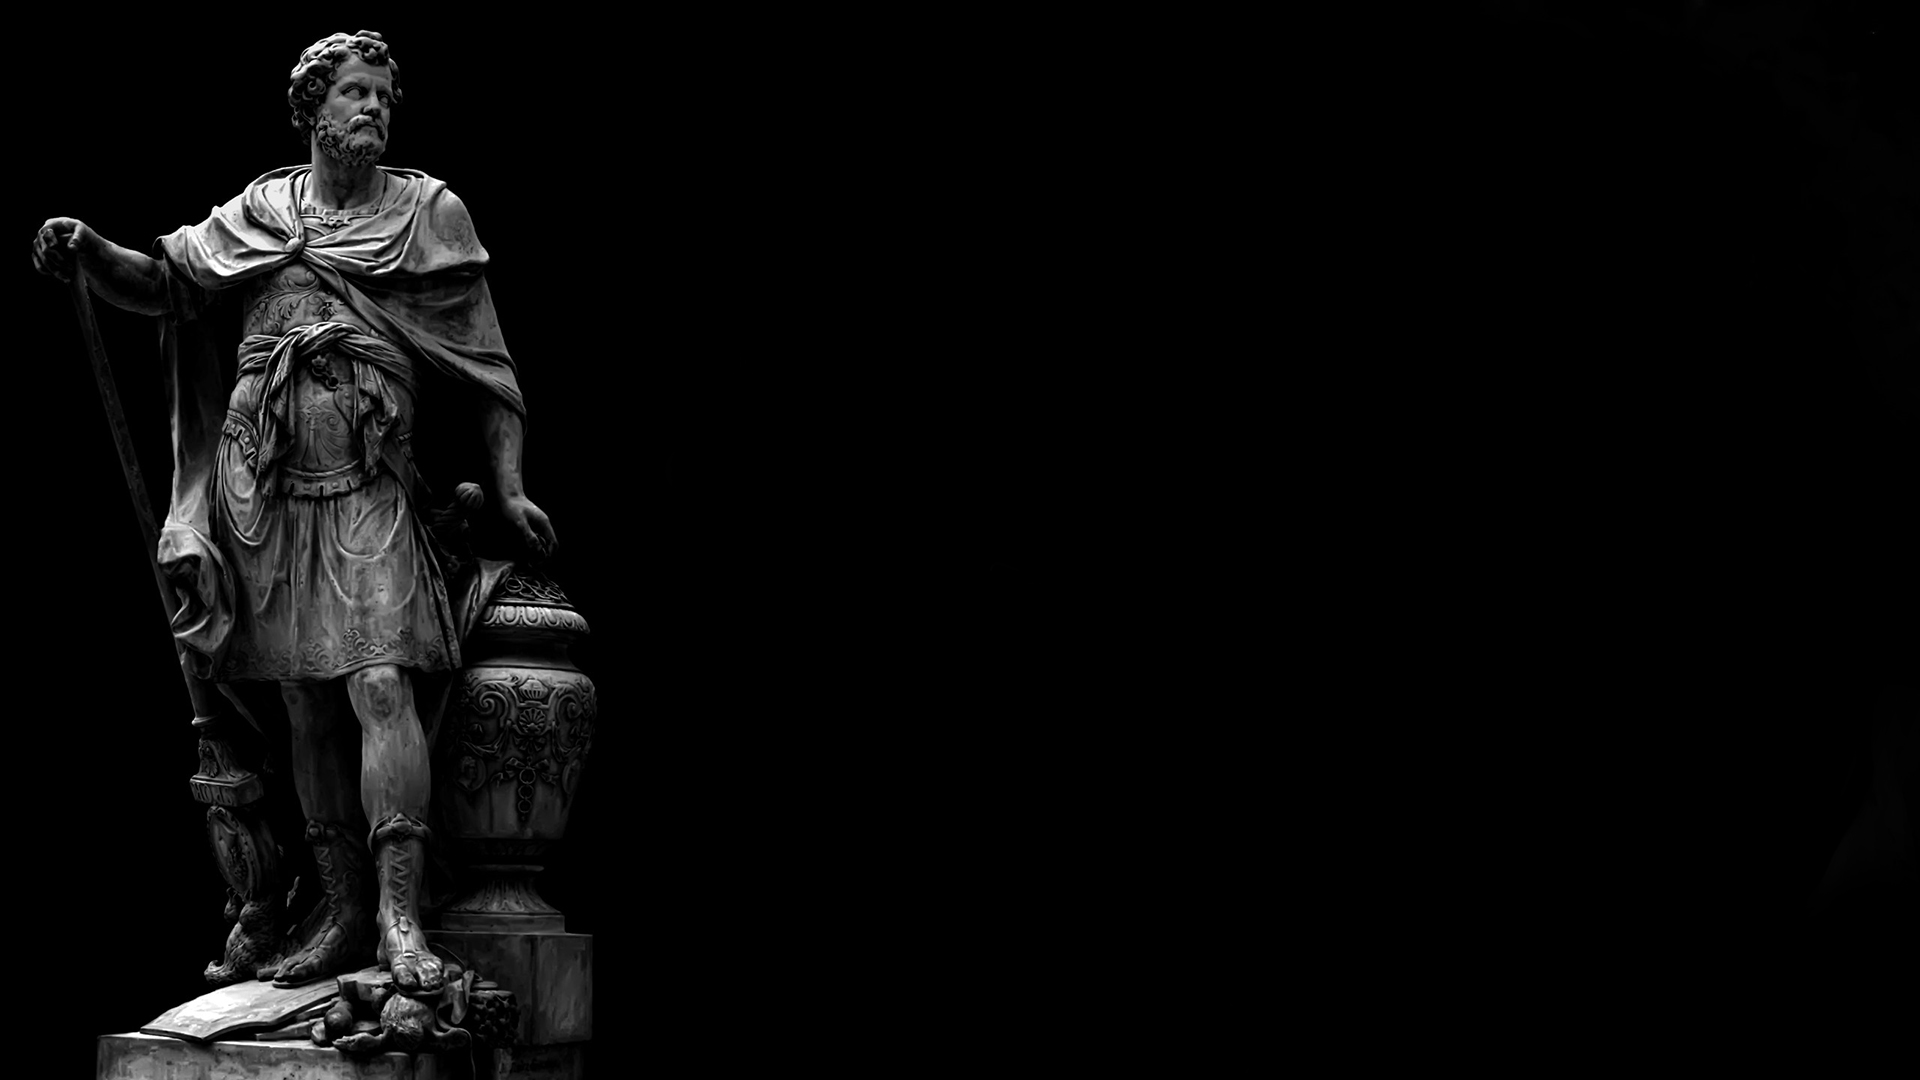 A black and white photo of a statue of a man with a beard and a cloak, holding a staff. - Greek statue